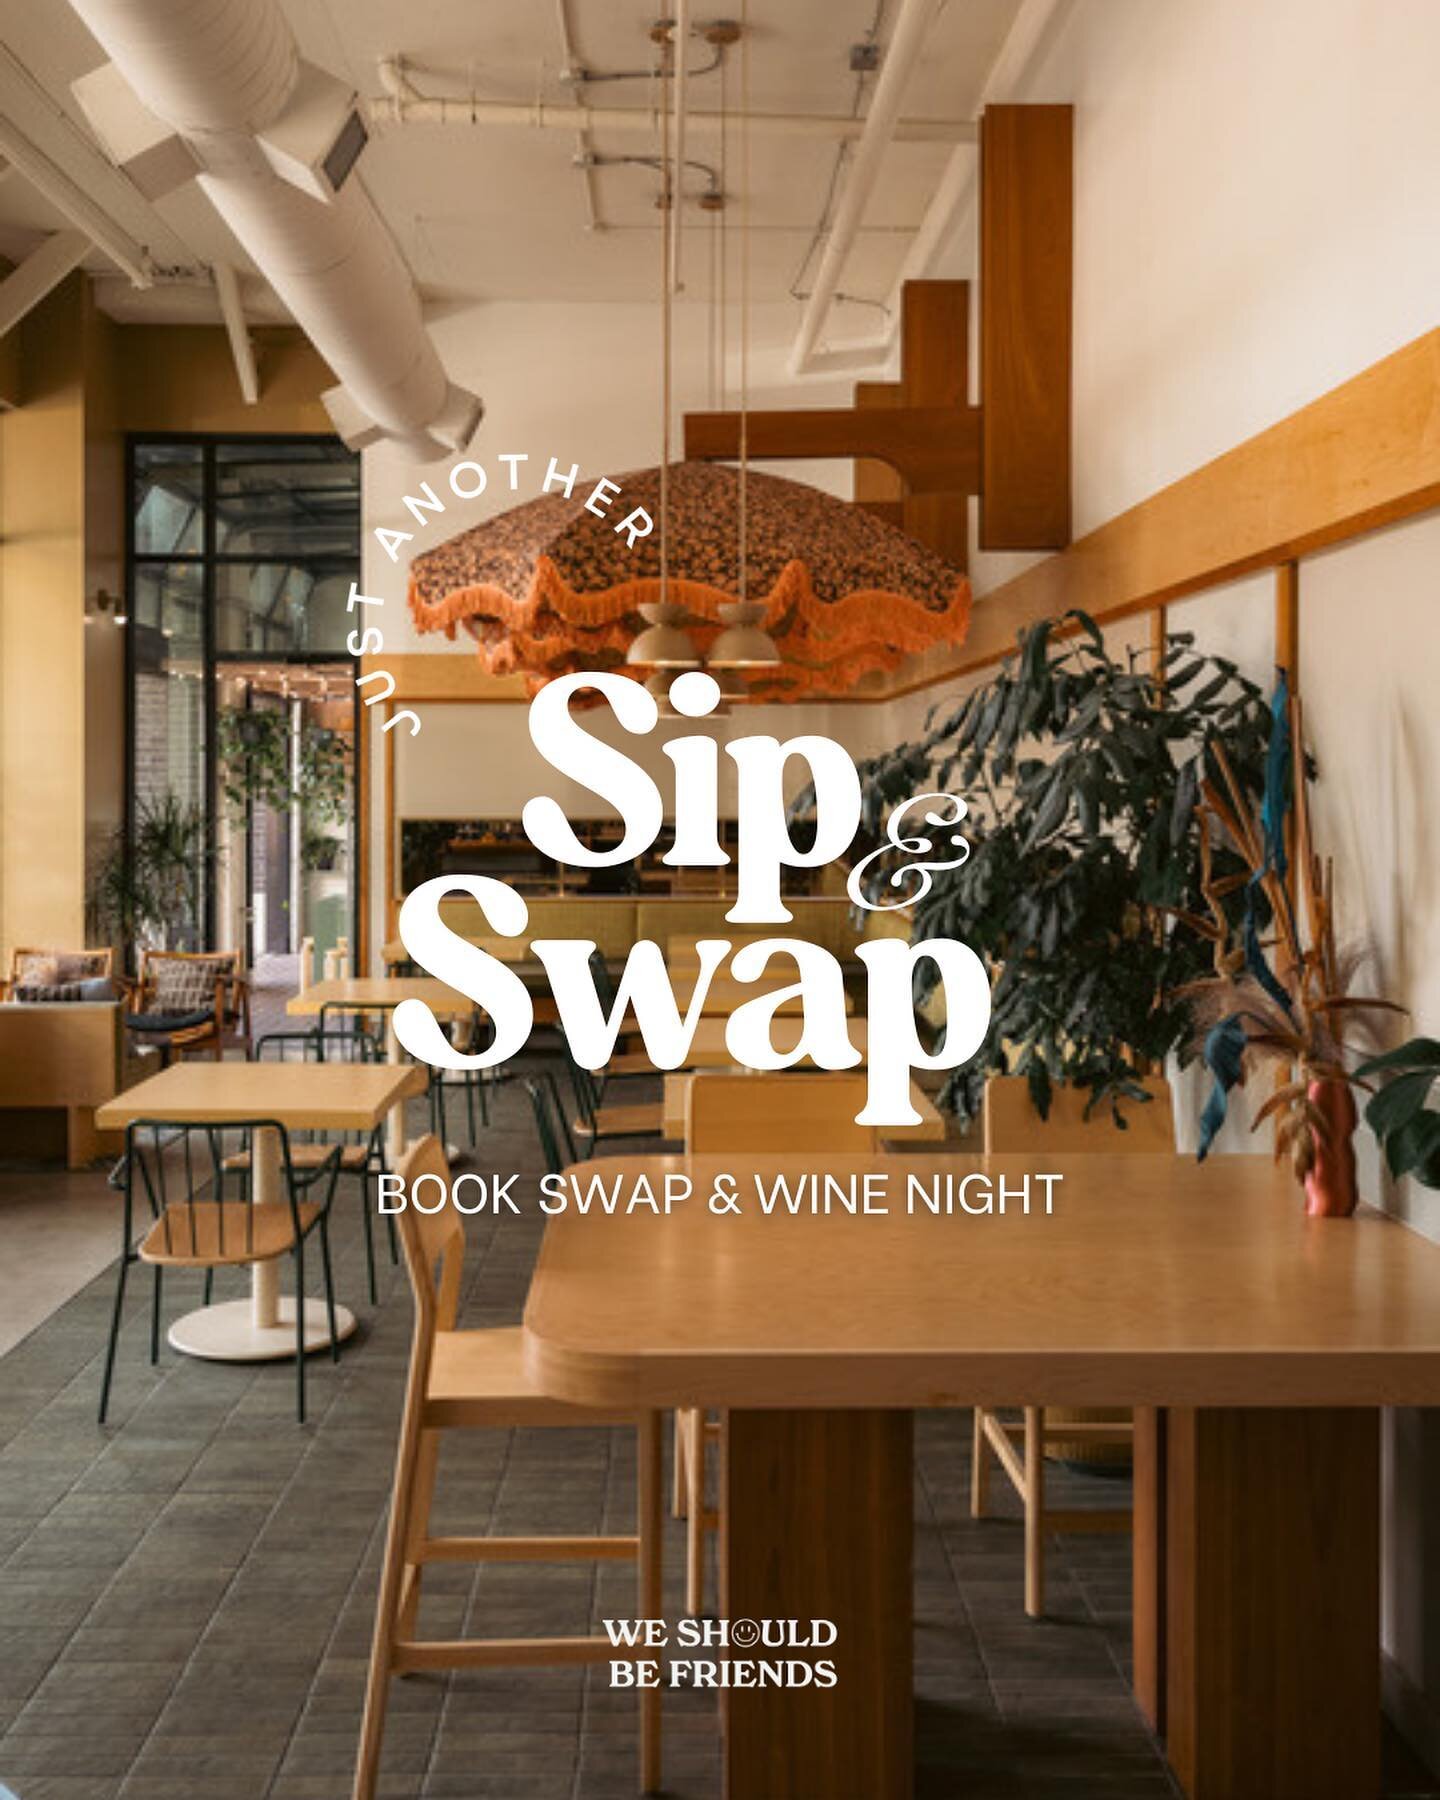 NEW EVENT ALERT!

Okay picture this: you&rsquo;re sipping on wine, swapping books, and making friends with fellow book-lovers. 

What could be better?!

Join us for our first ever Sip &amp; Swap event and we&rsquo;ll be doing just that!

WHERE:
Just 